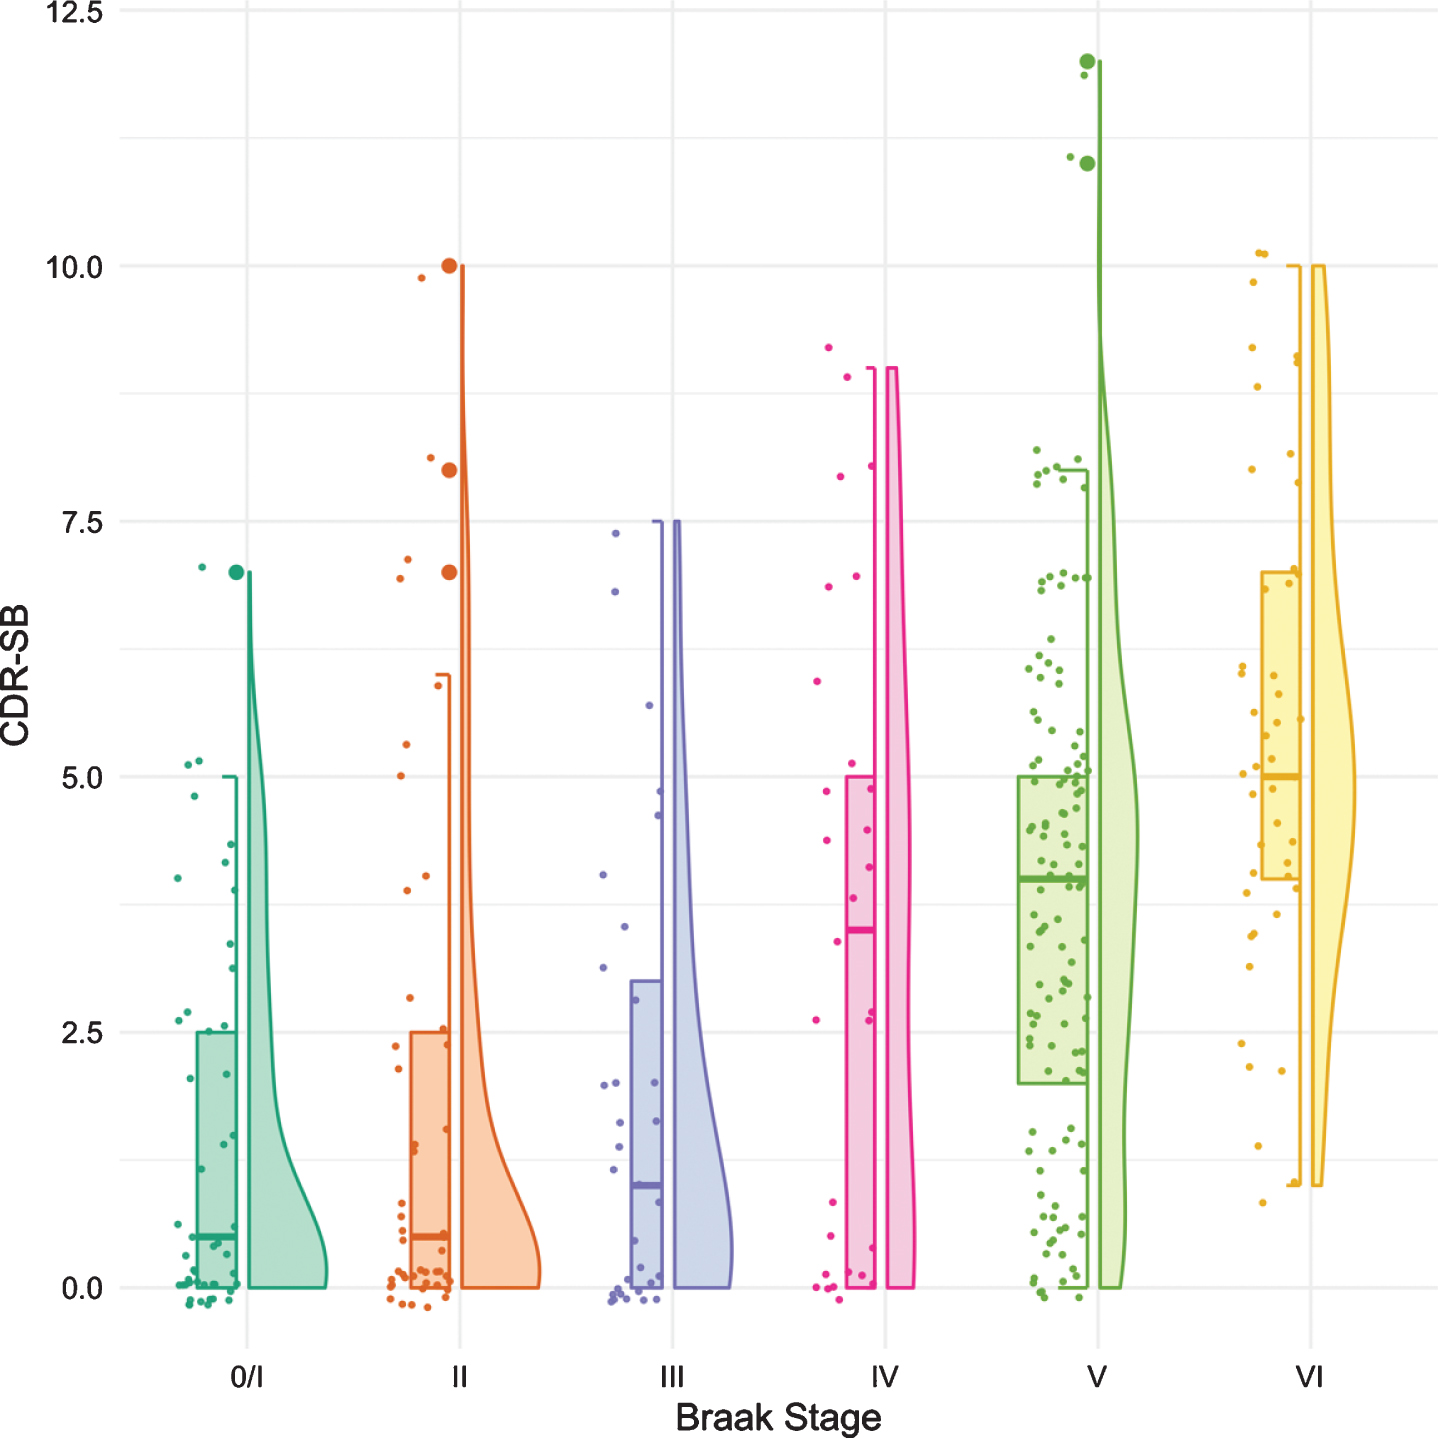 Boxplots and violin plots for CDR-SB as a function of Braak stage.